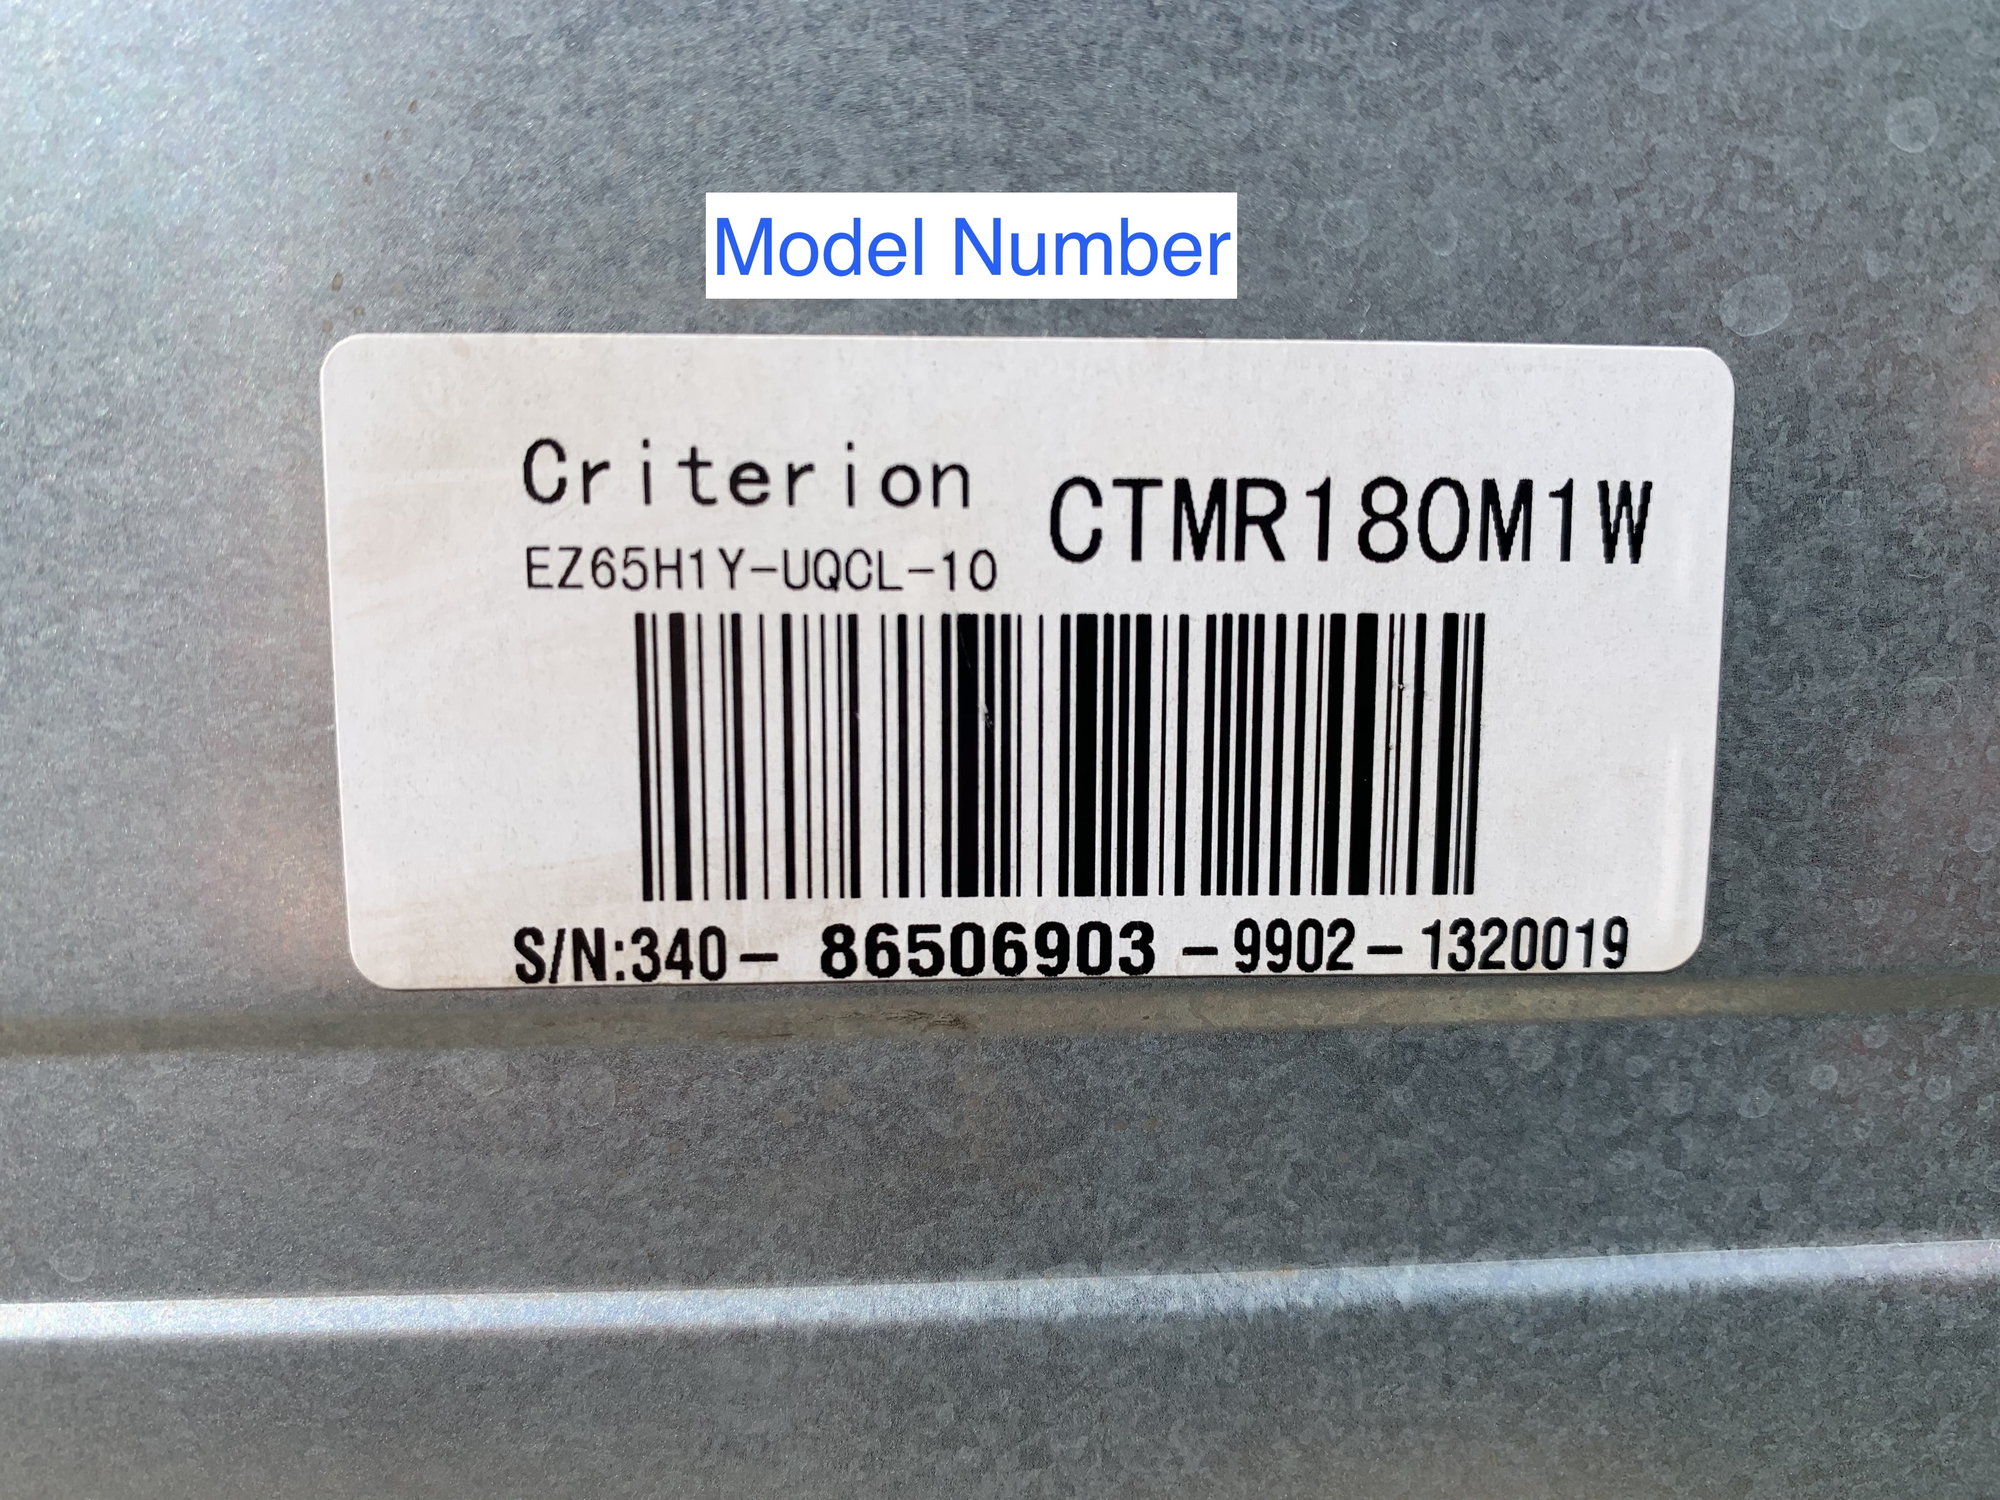 I have a criterion 9.9 cubic ft fridge model CTMR99M1S that I need a heater  kit for so it will operate correctly in my